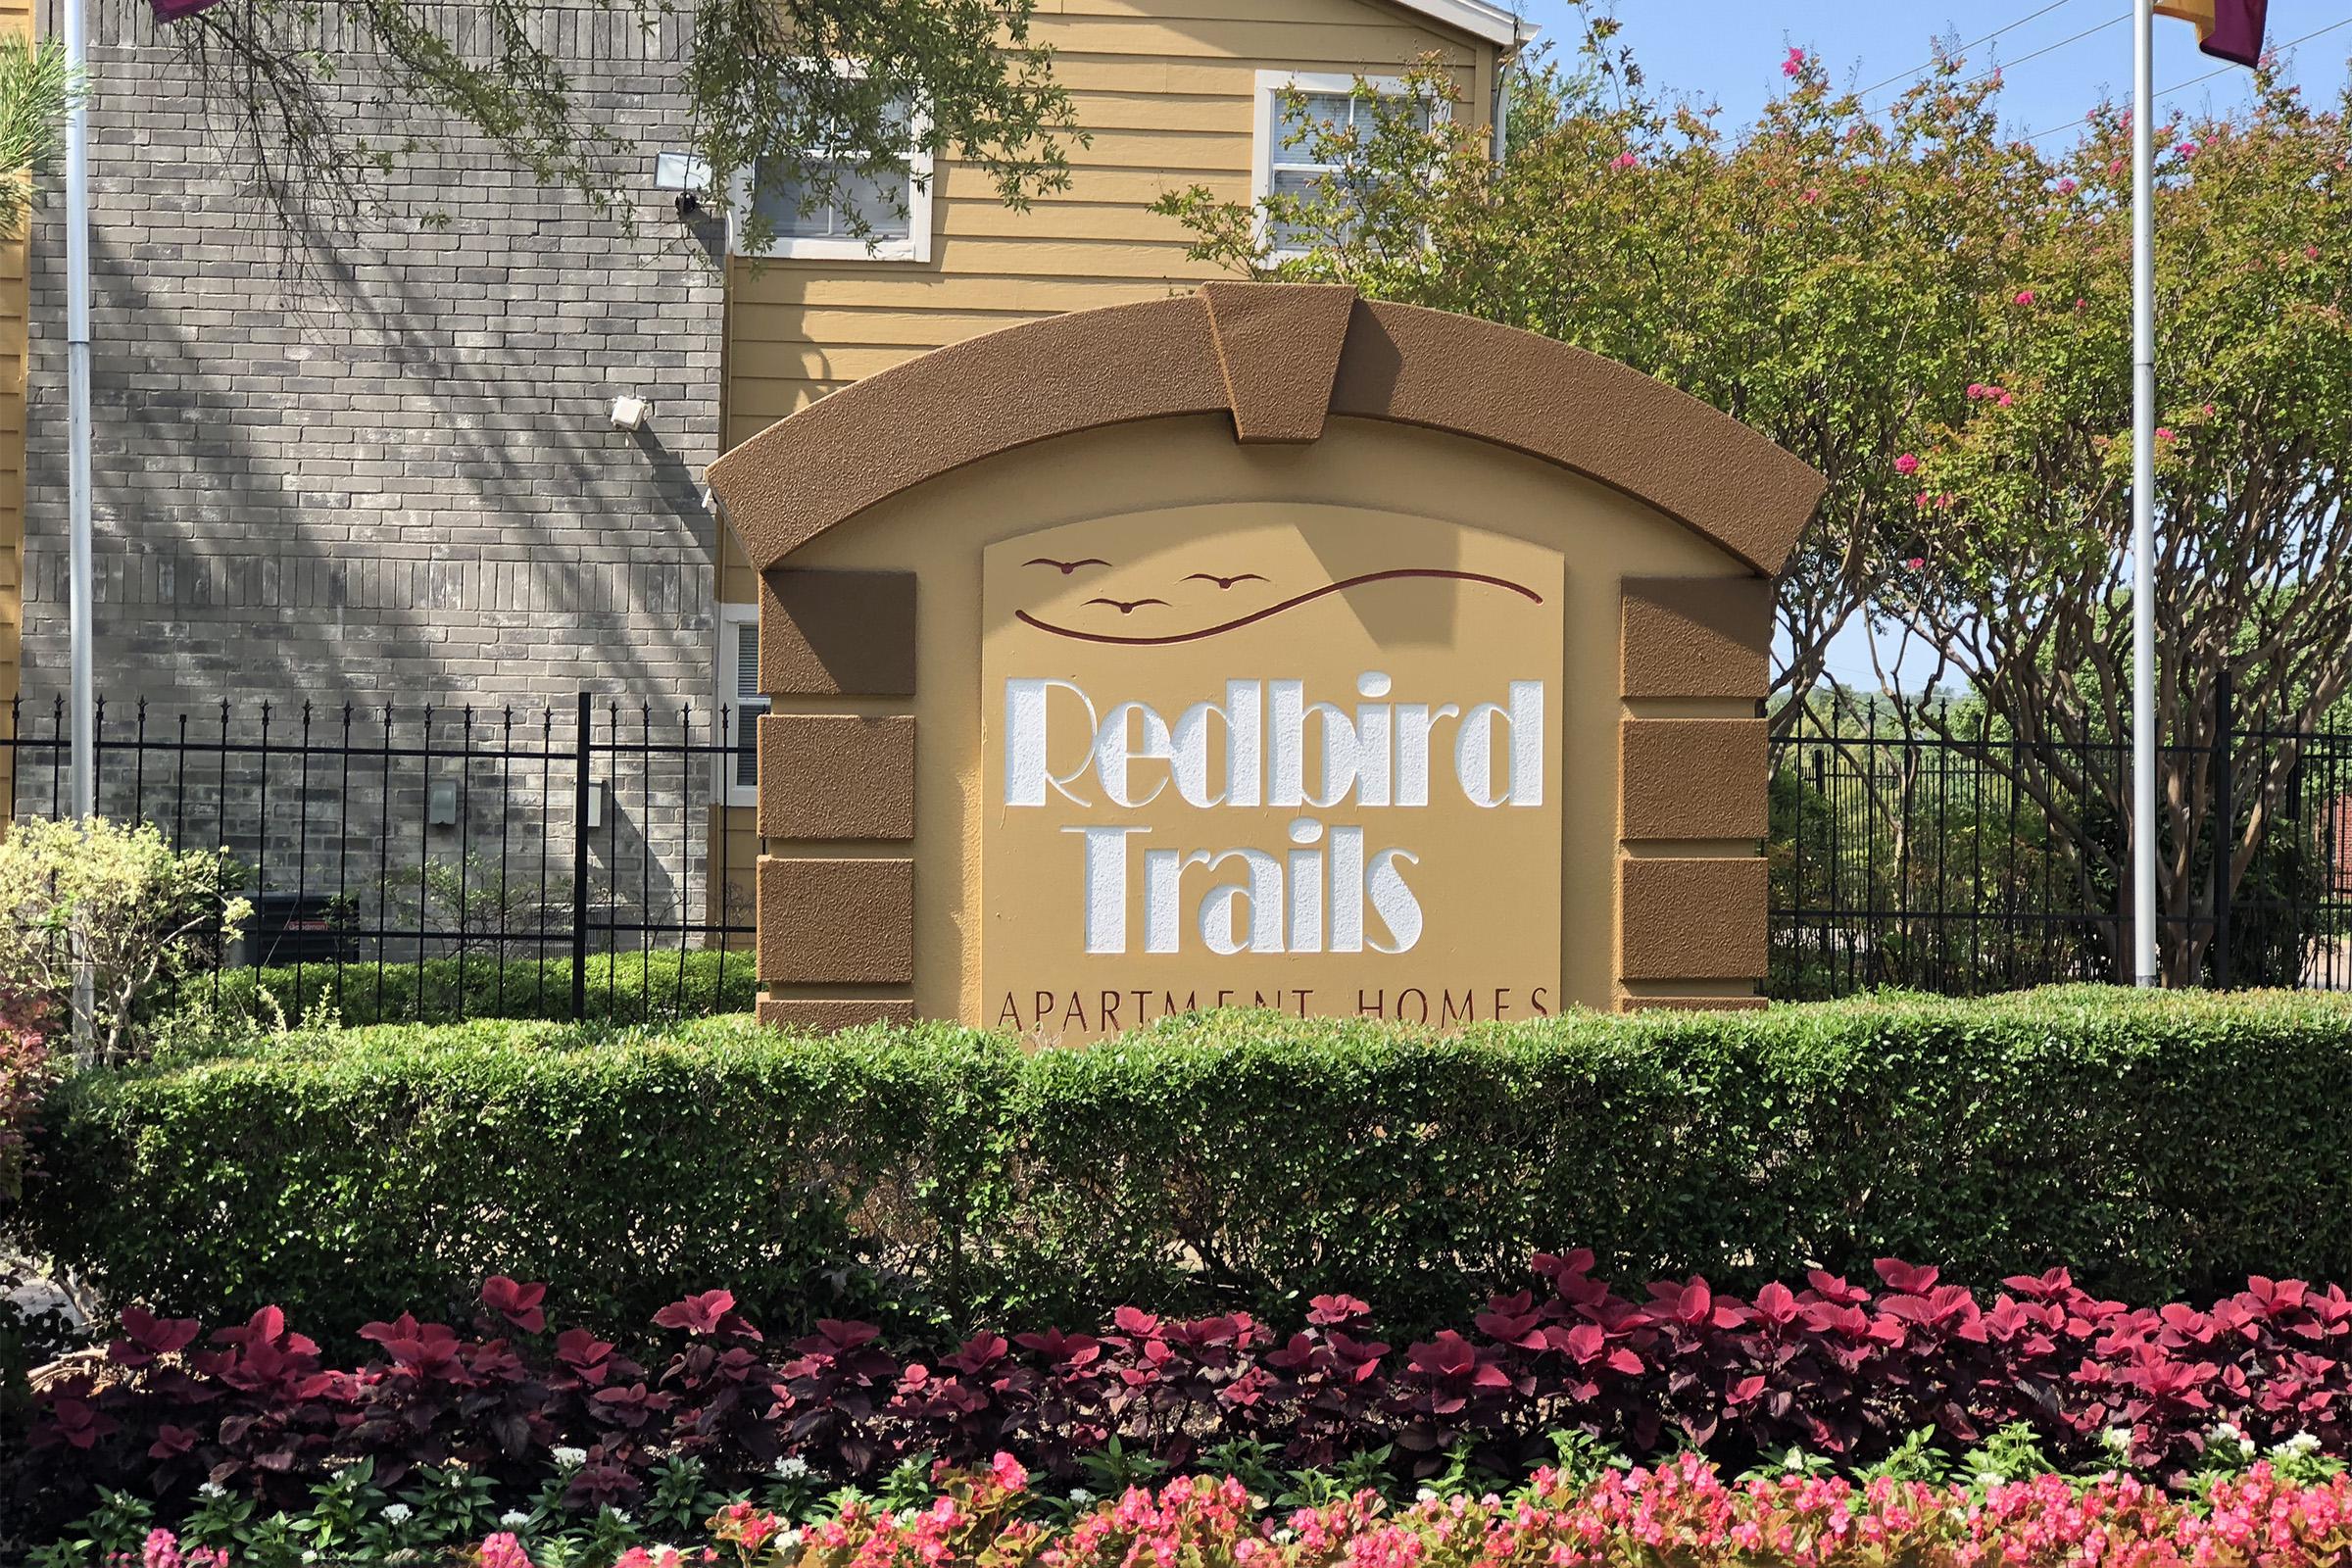 WELCOME HOME TO REDBIRD TRAILS APARTMENTS